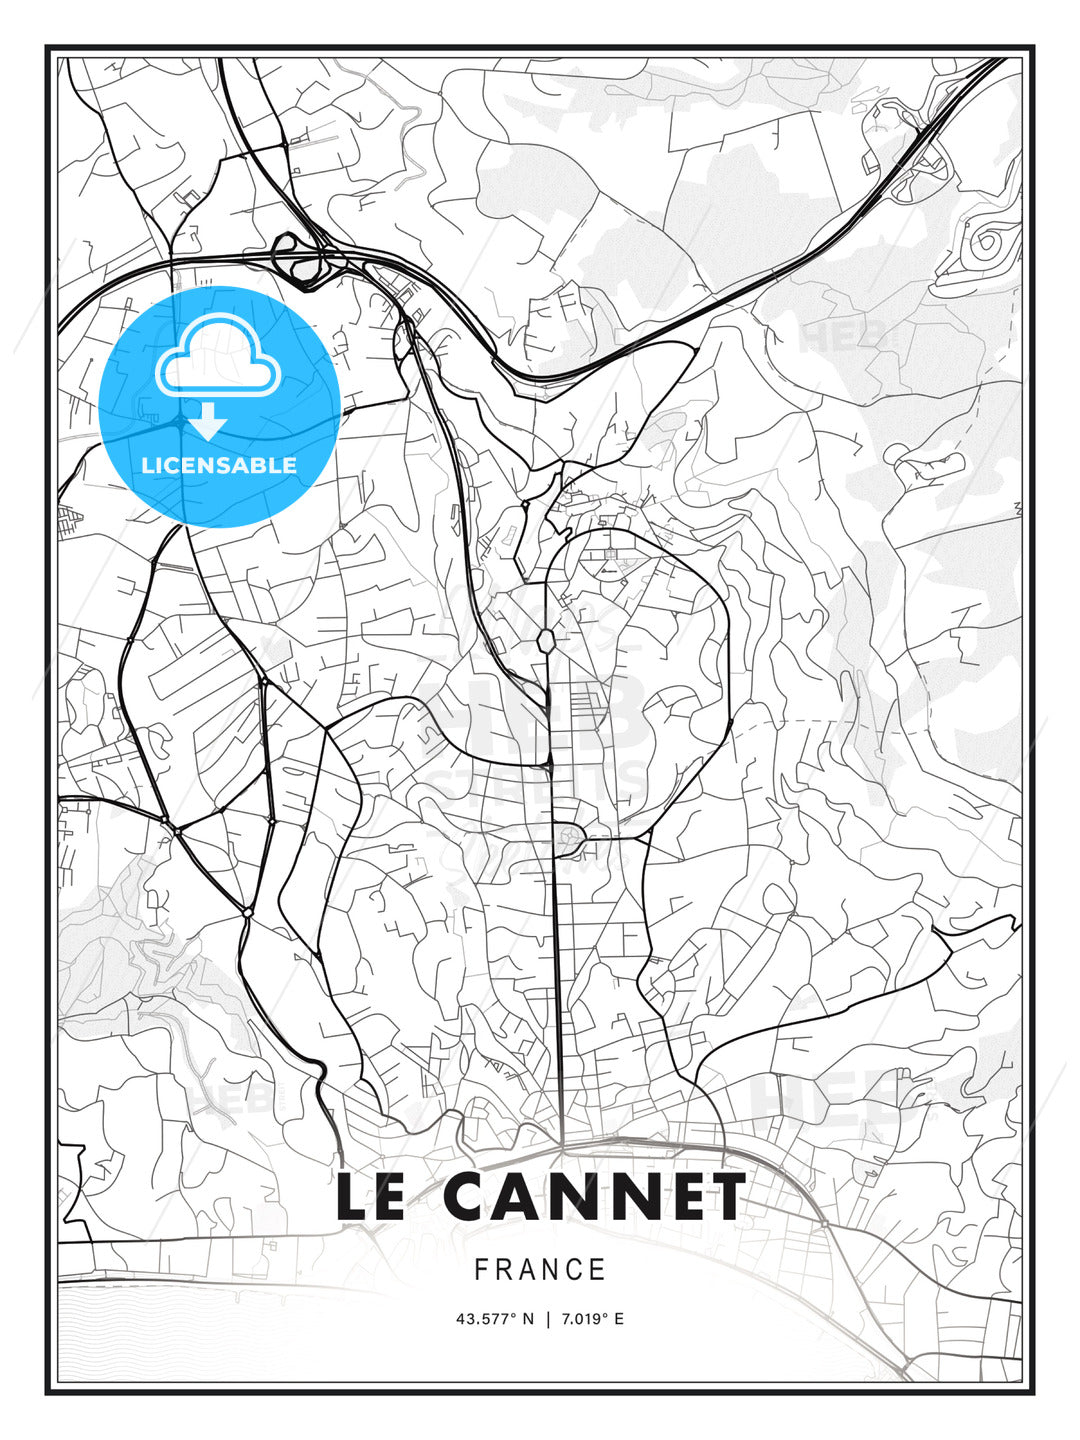 Le Cannet, France, Modern Print Template in Various Formats - HEBSTREITS Sketches